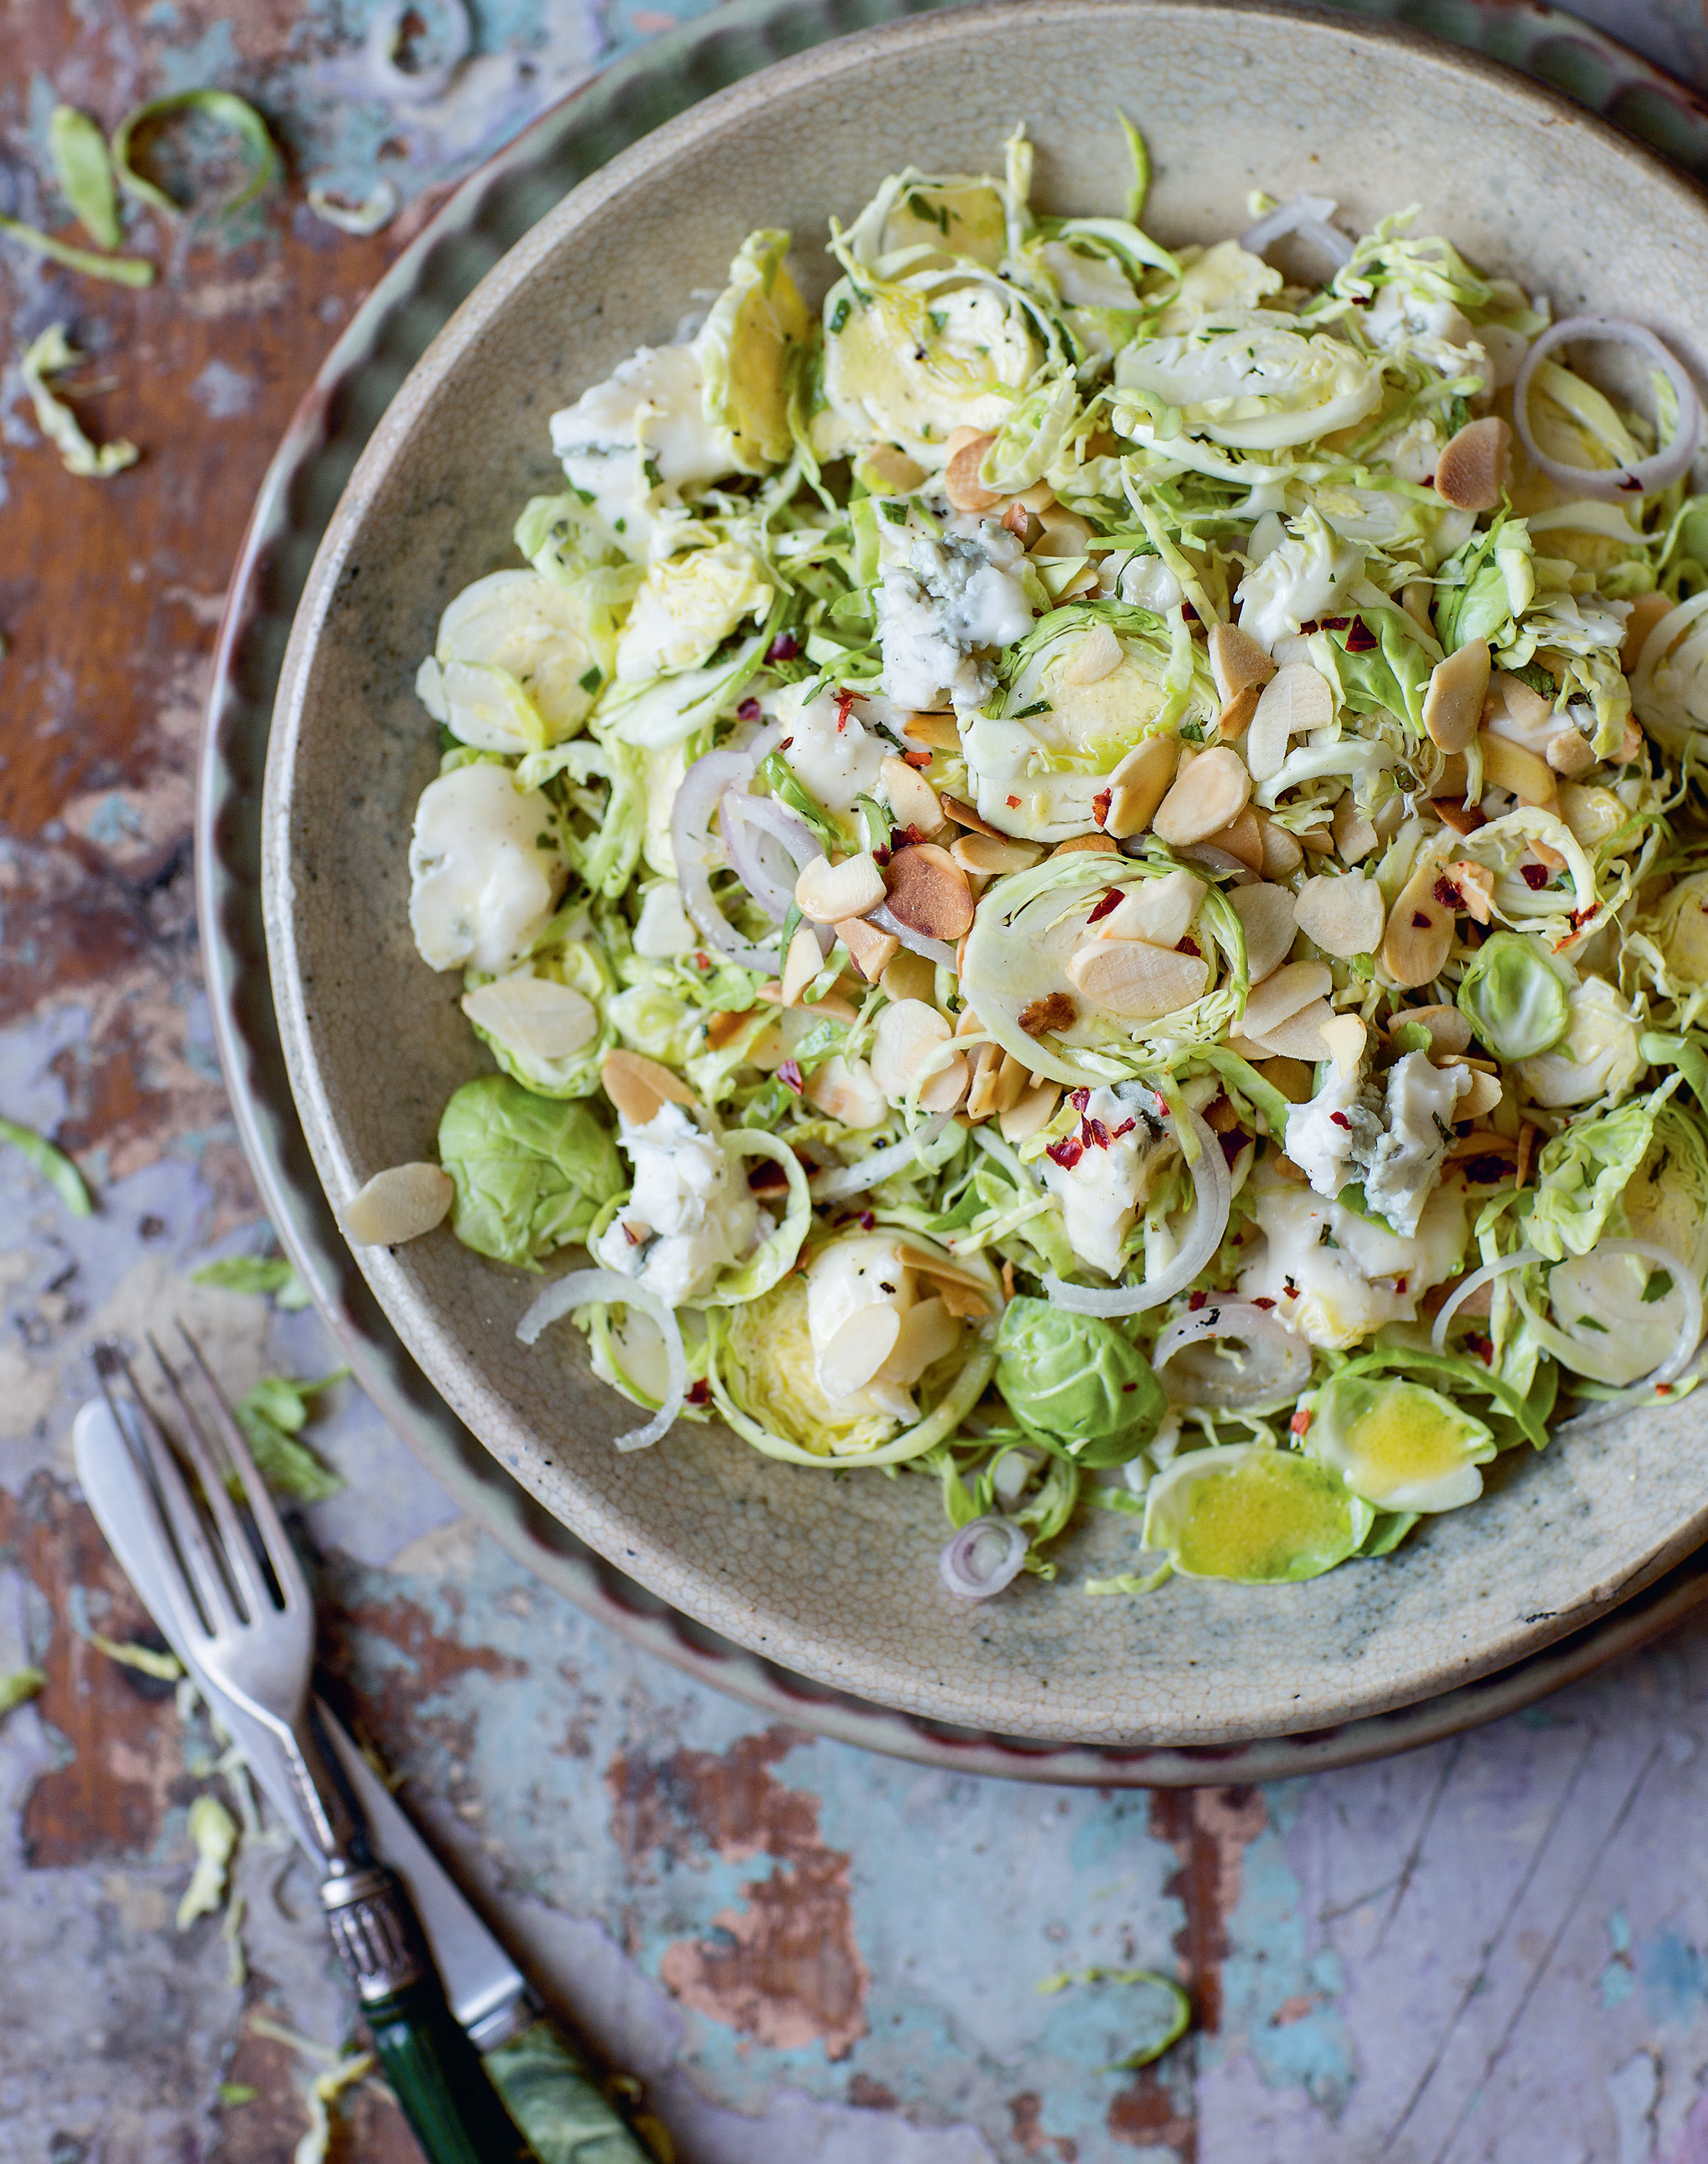 Shredded sprout salad, two ways